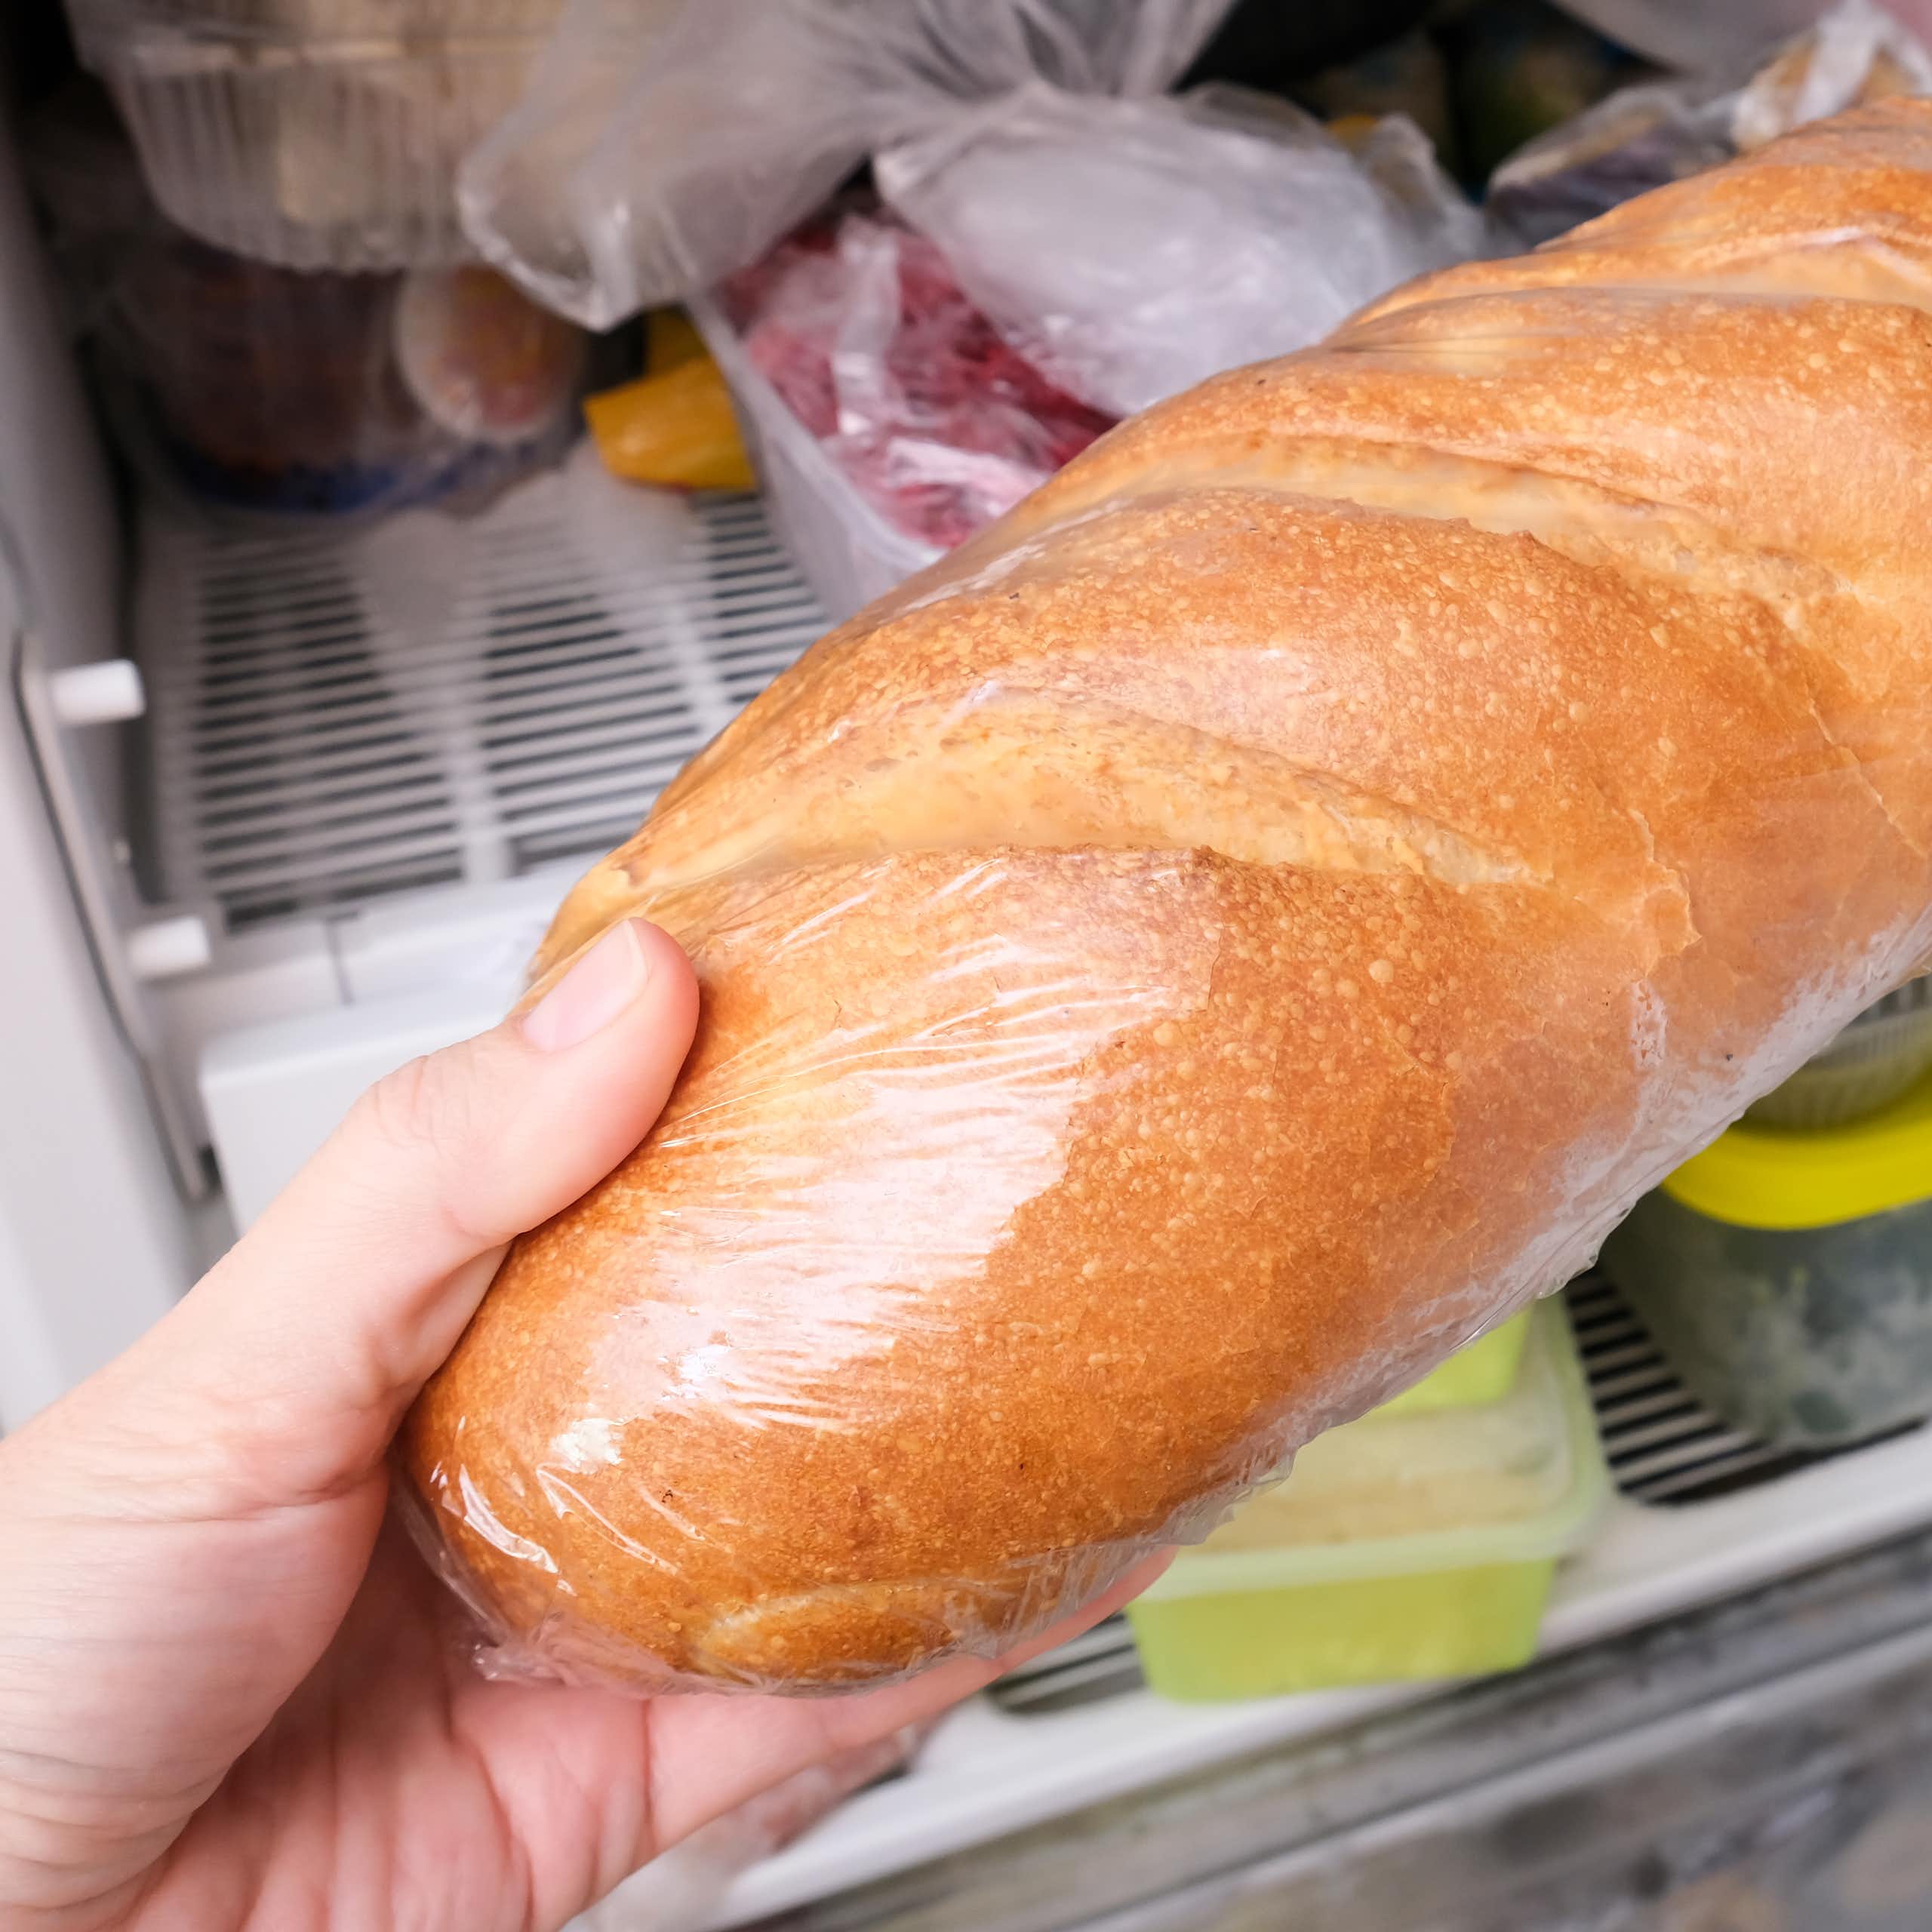 TikTok users claim freezing bread can make it healthier – here’s what the science actually says